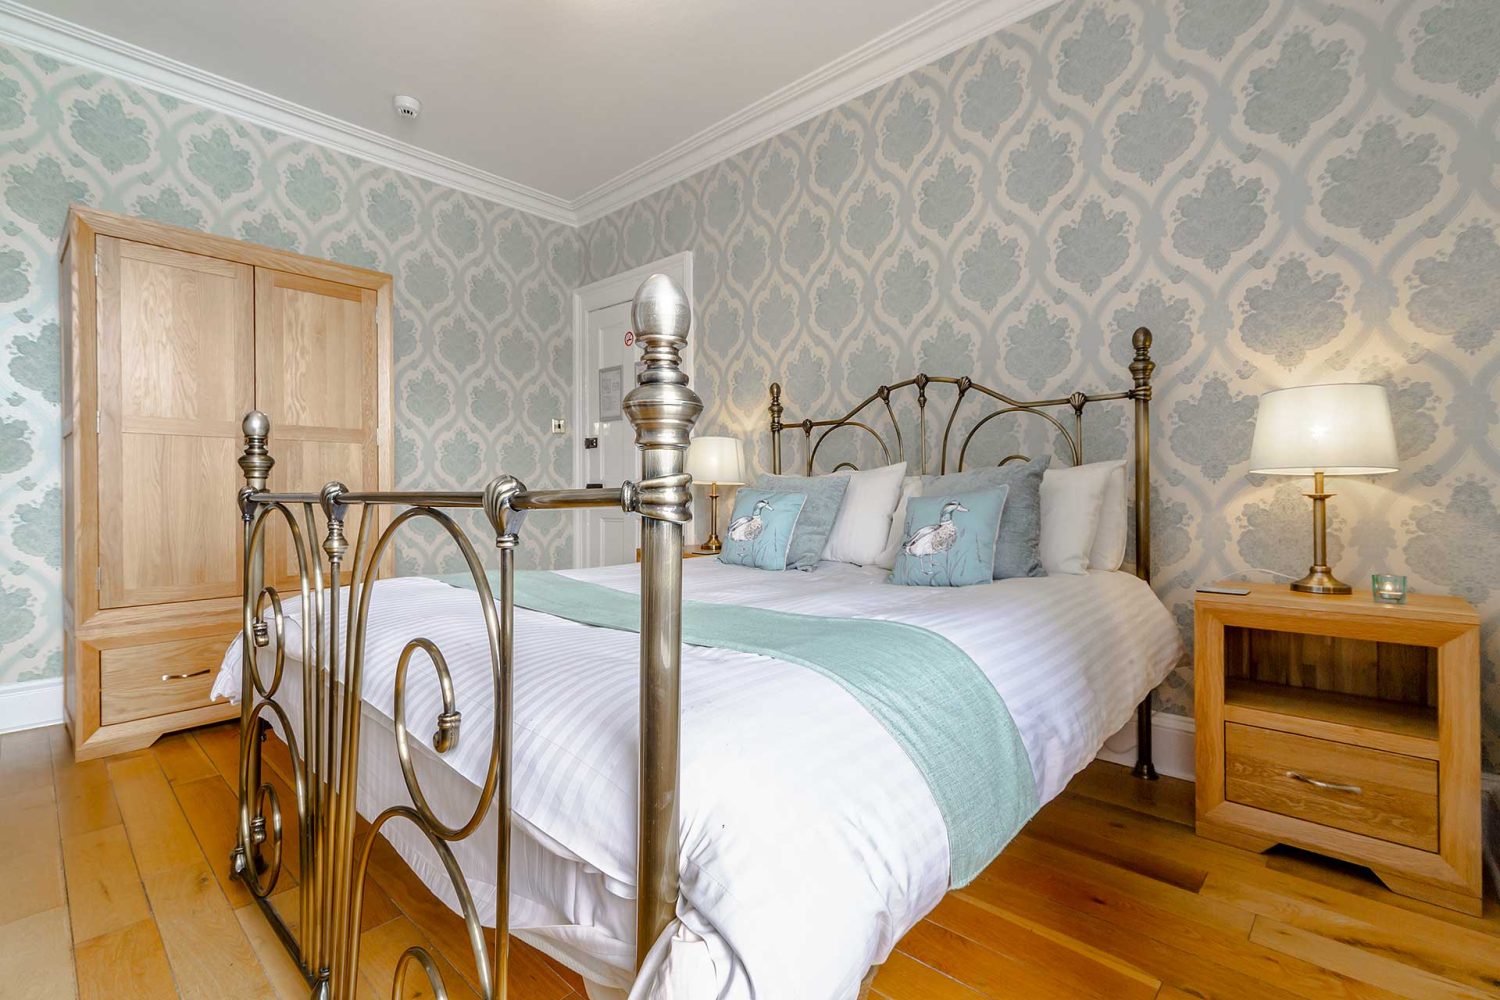 Large double bed in light green themed room